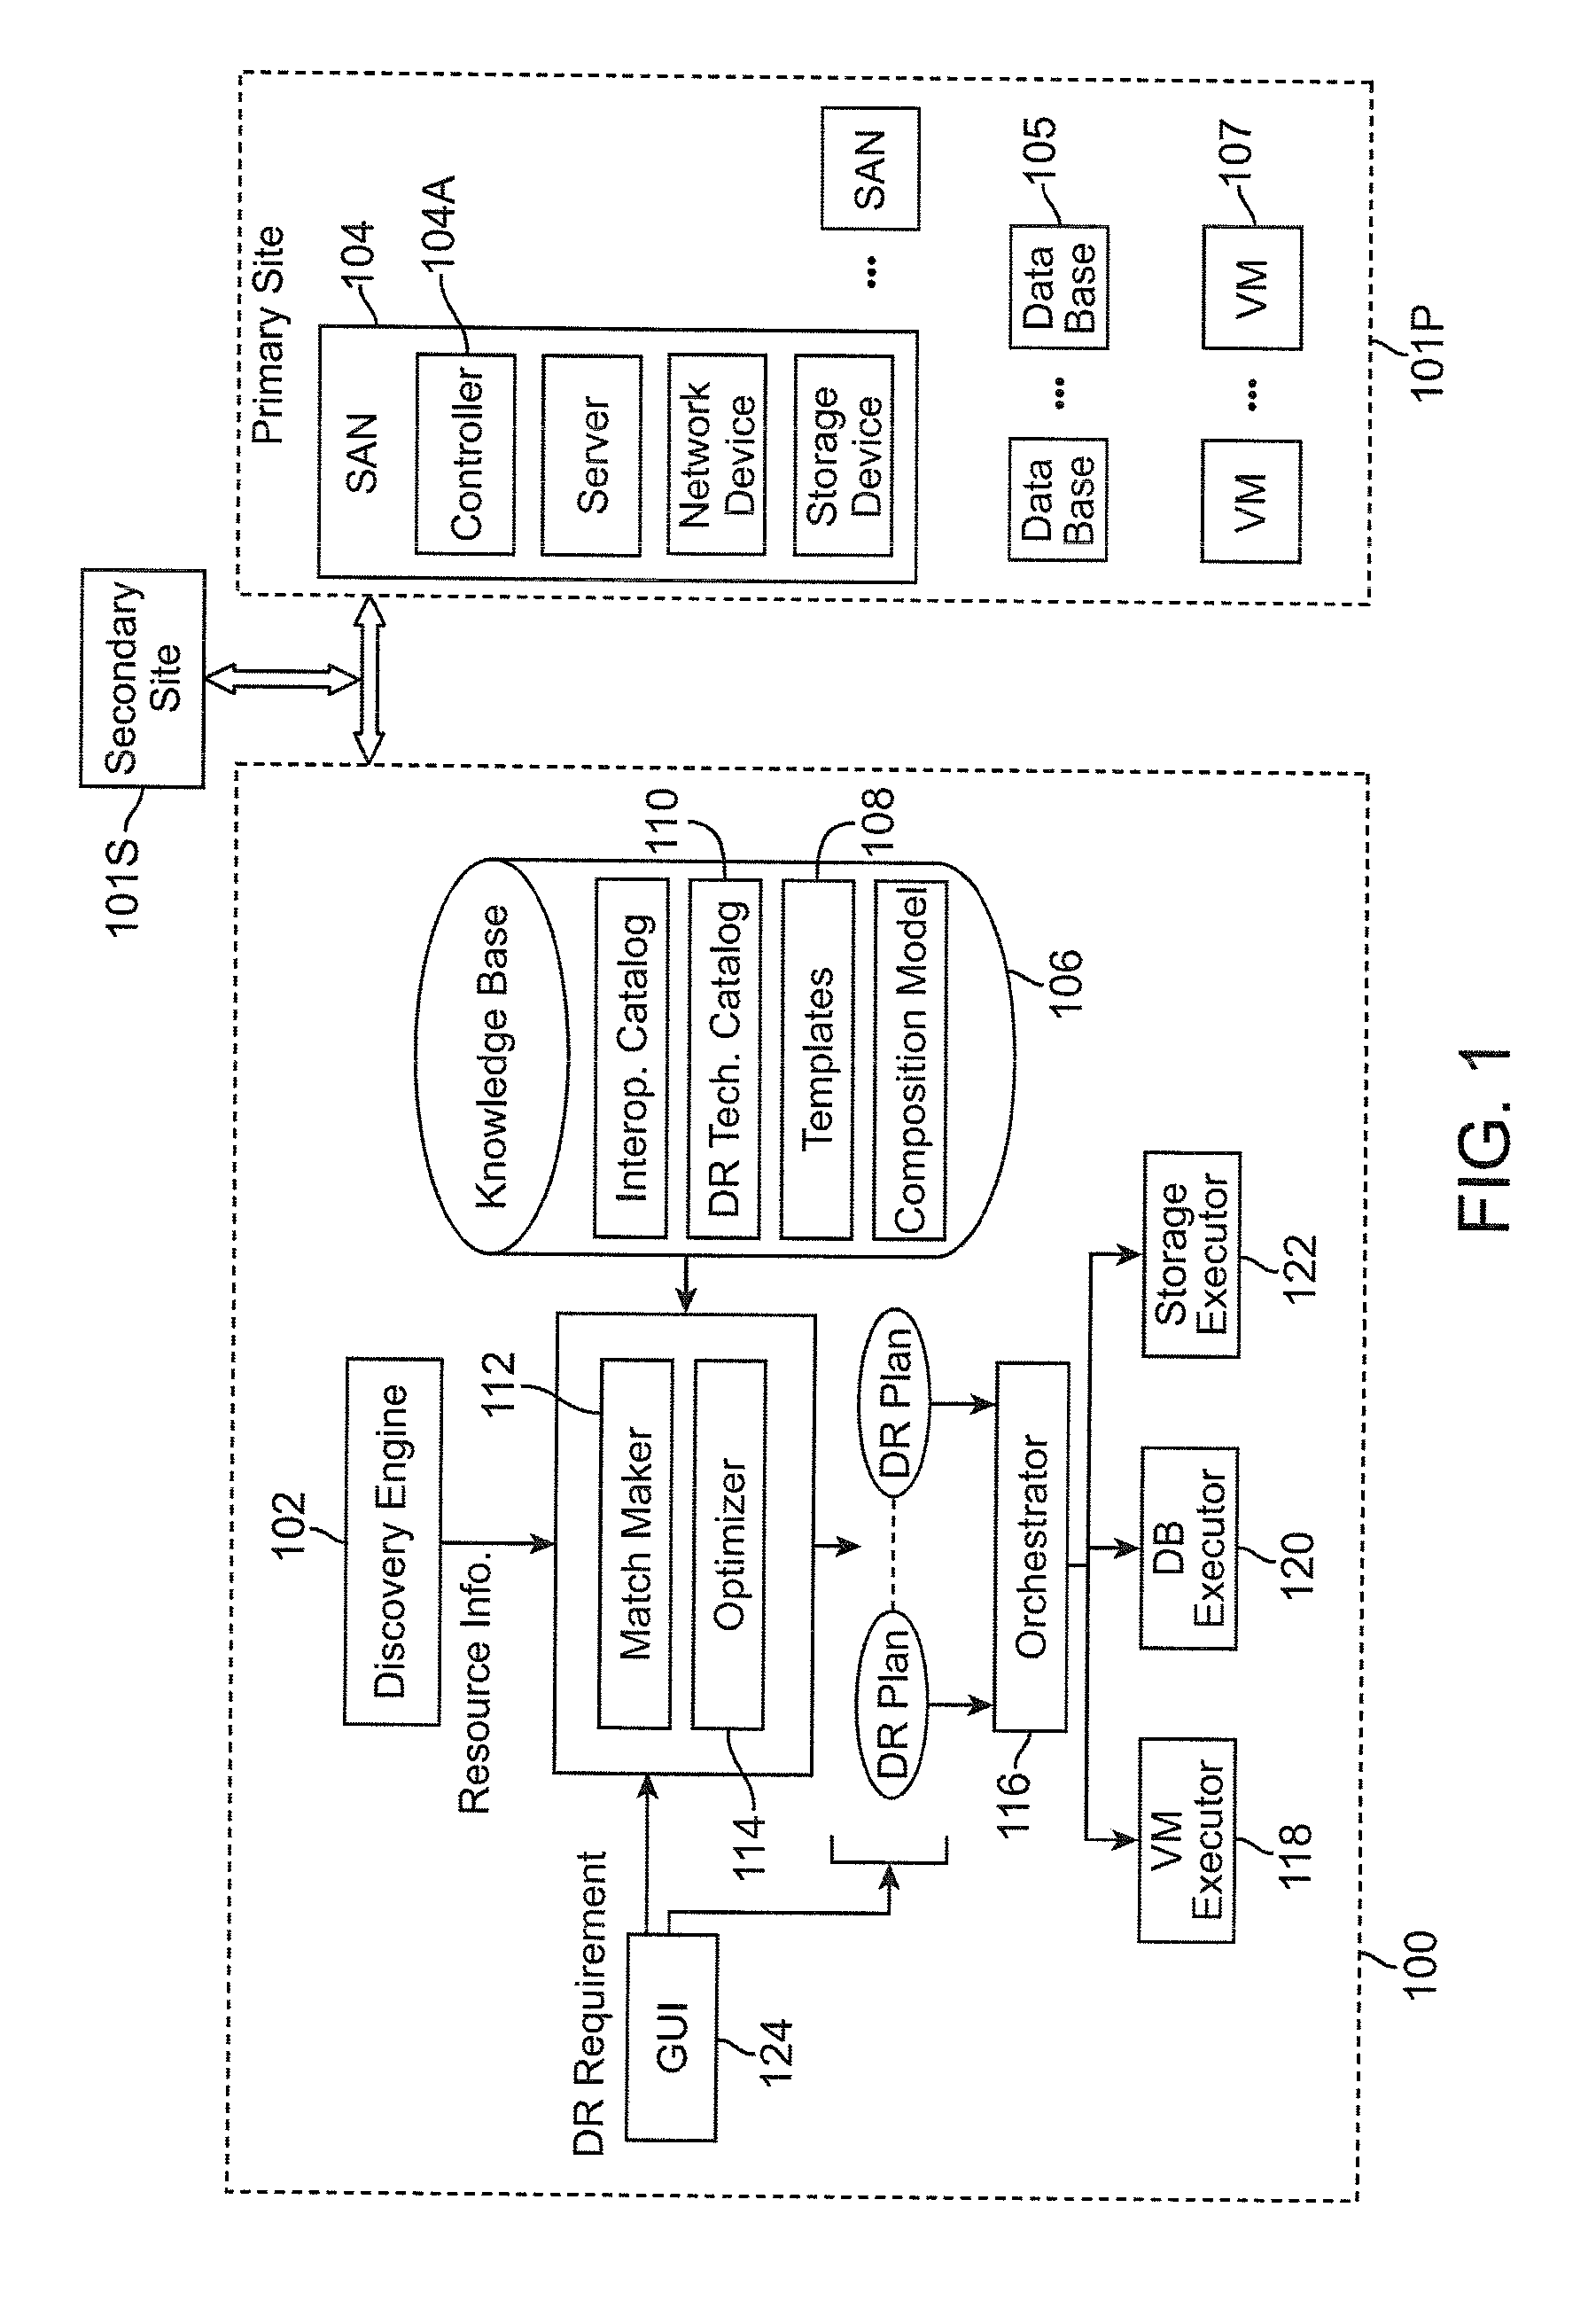 Method and system for automated integrated server-network-storage disaster recovery planning